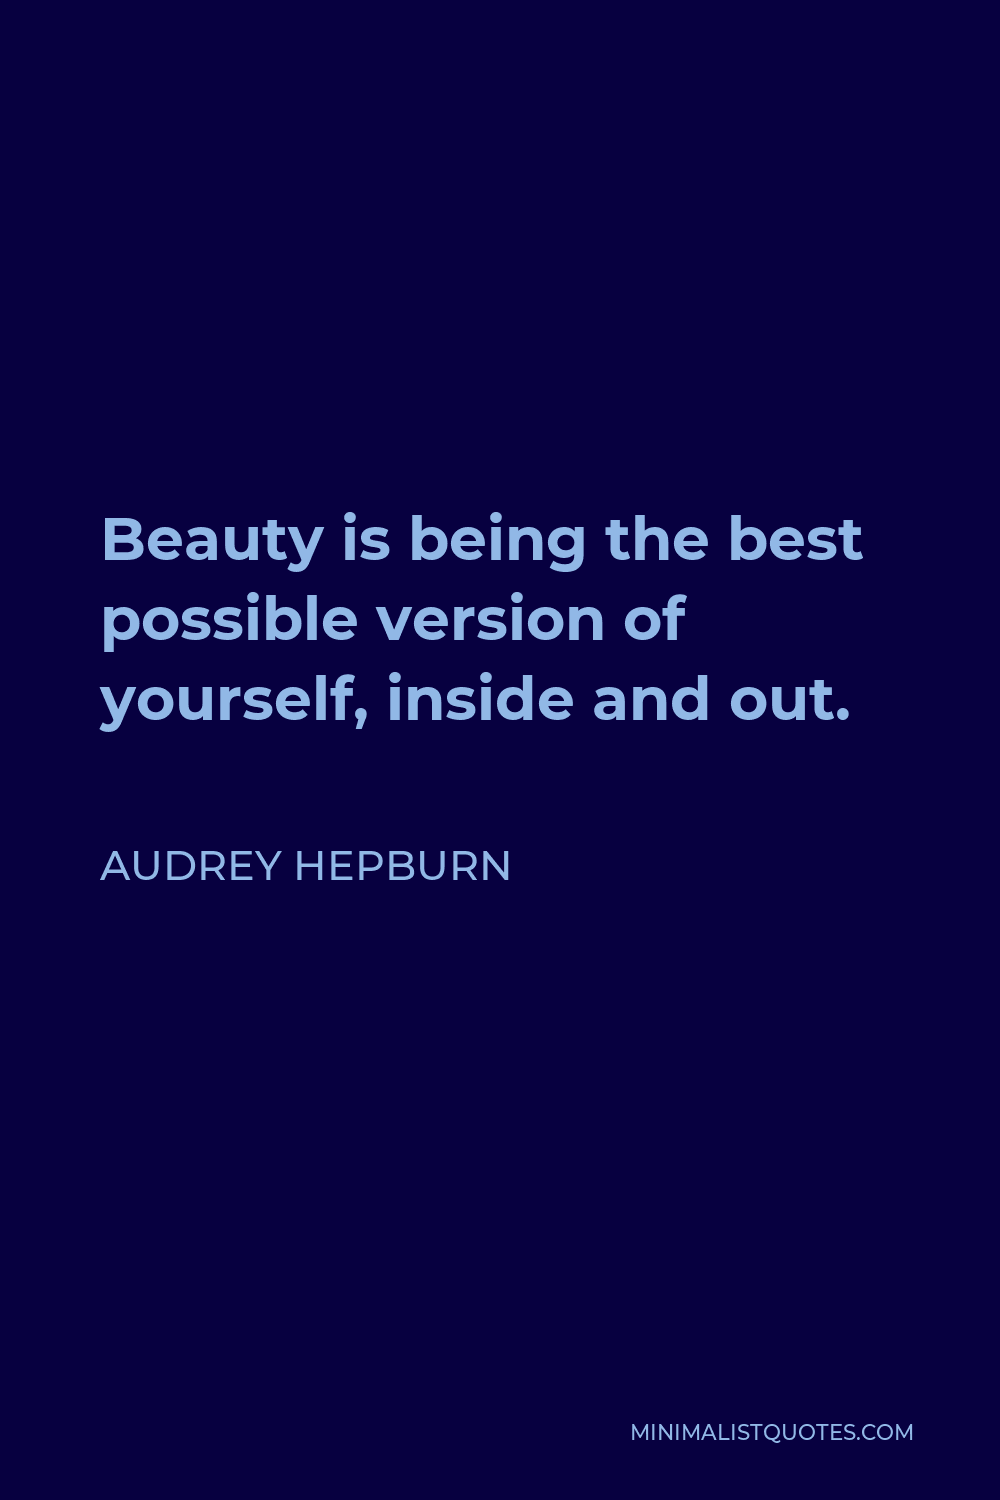 Audrey Hepburn Quote - Beauty is being the best possible version of yourself, inside and out.